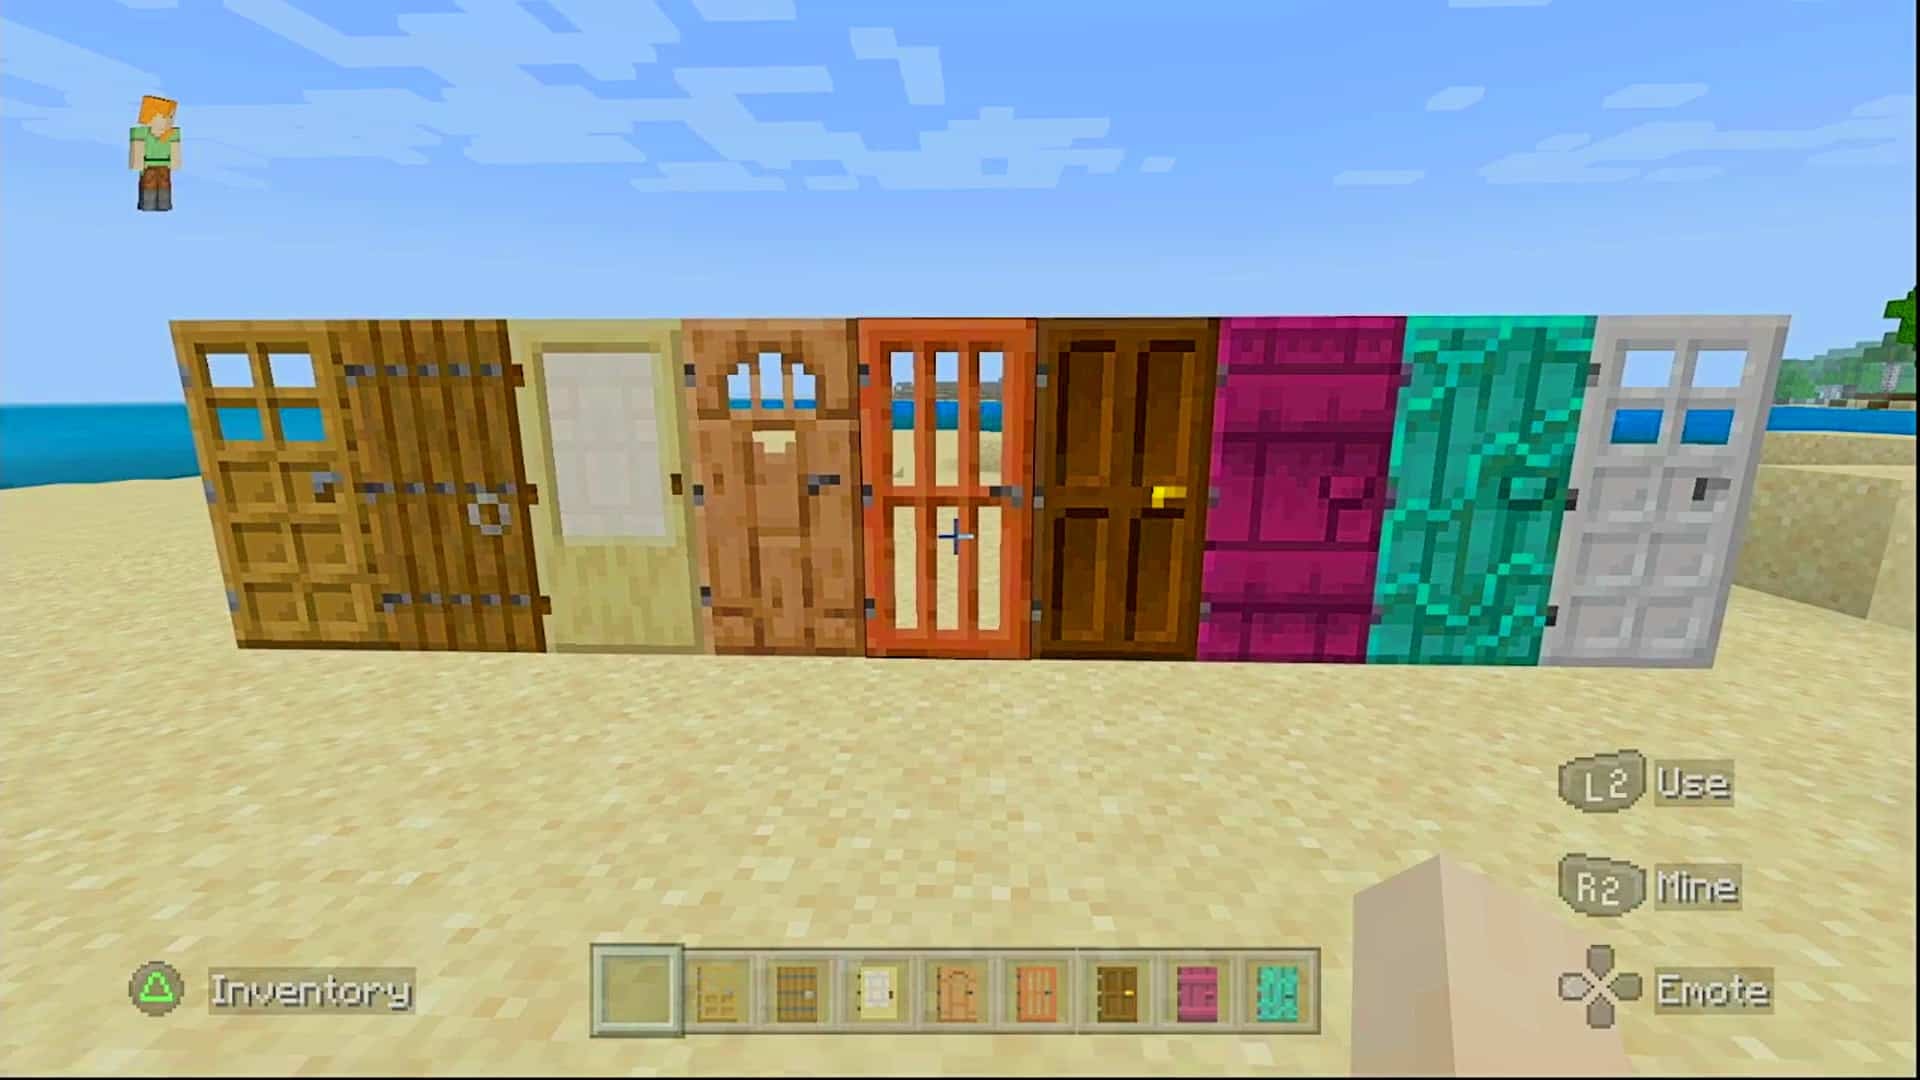 Every kind of door lined up on a beach.